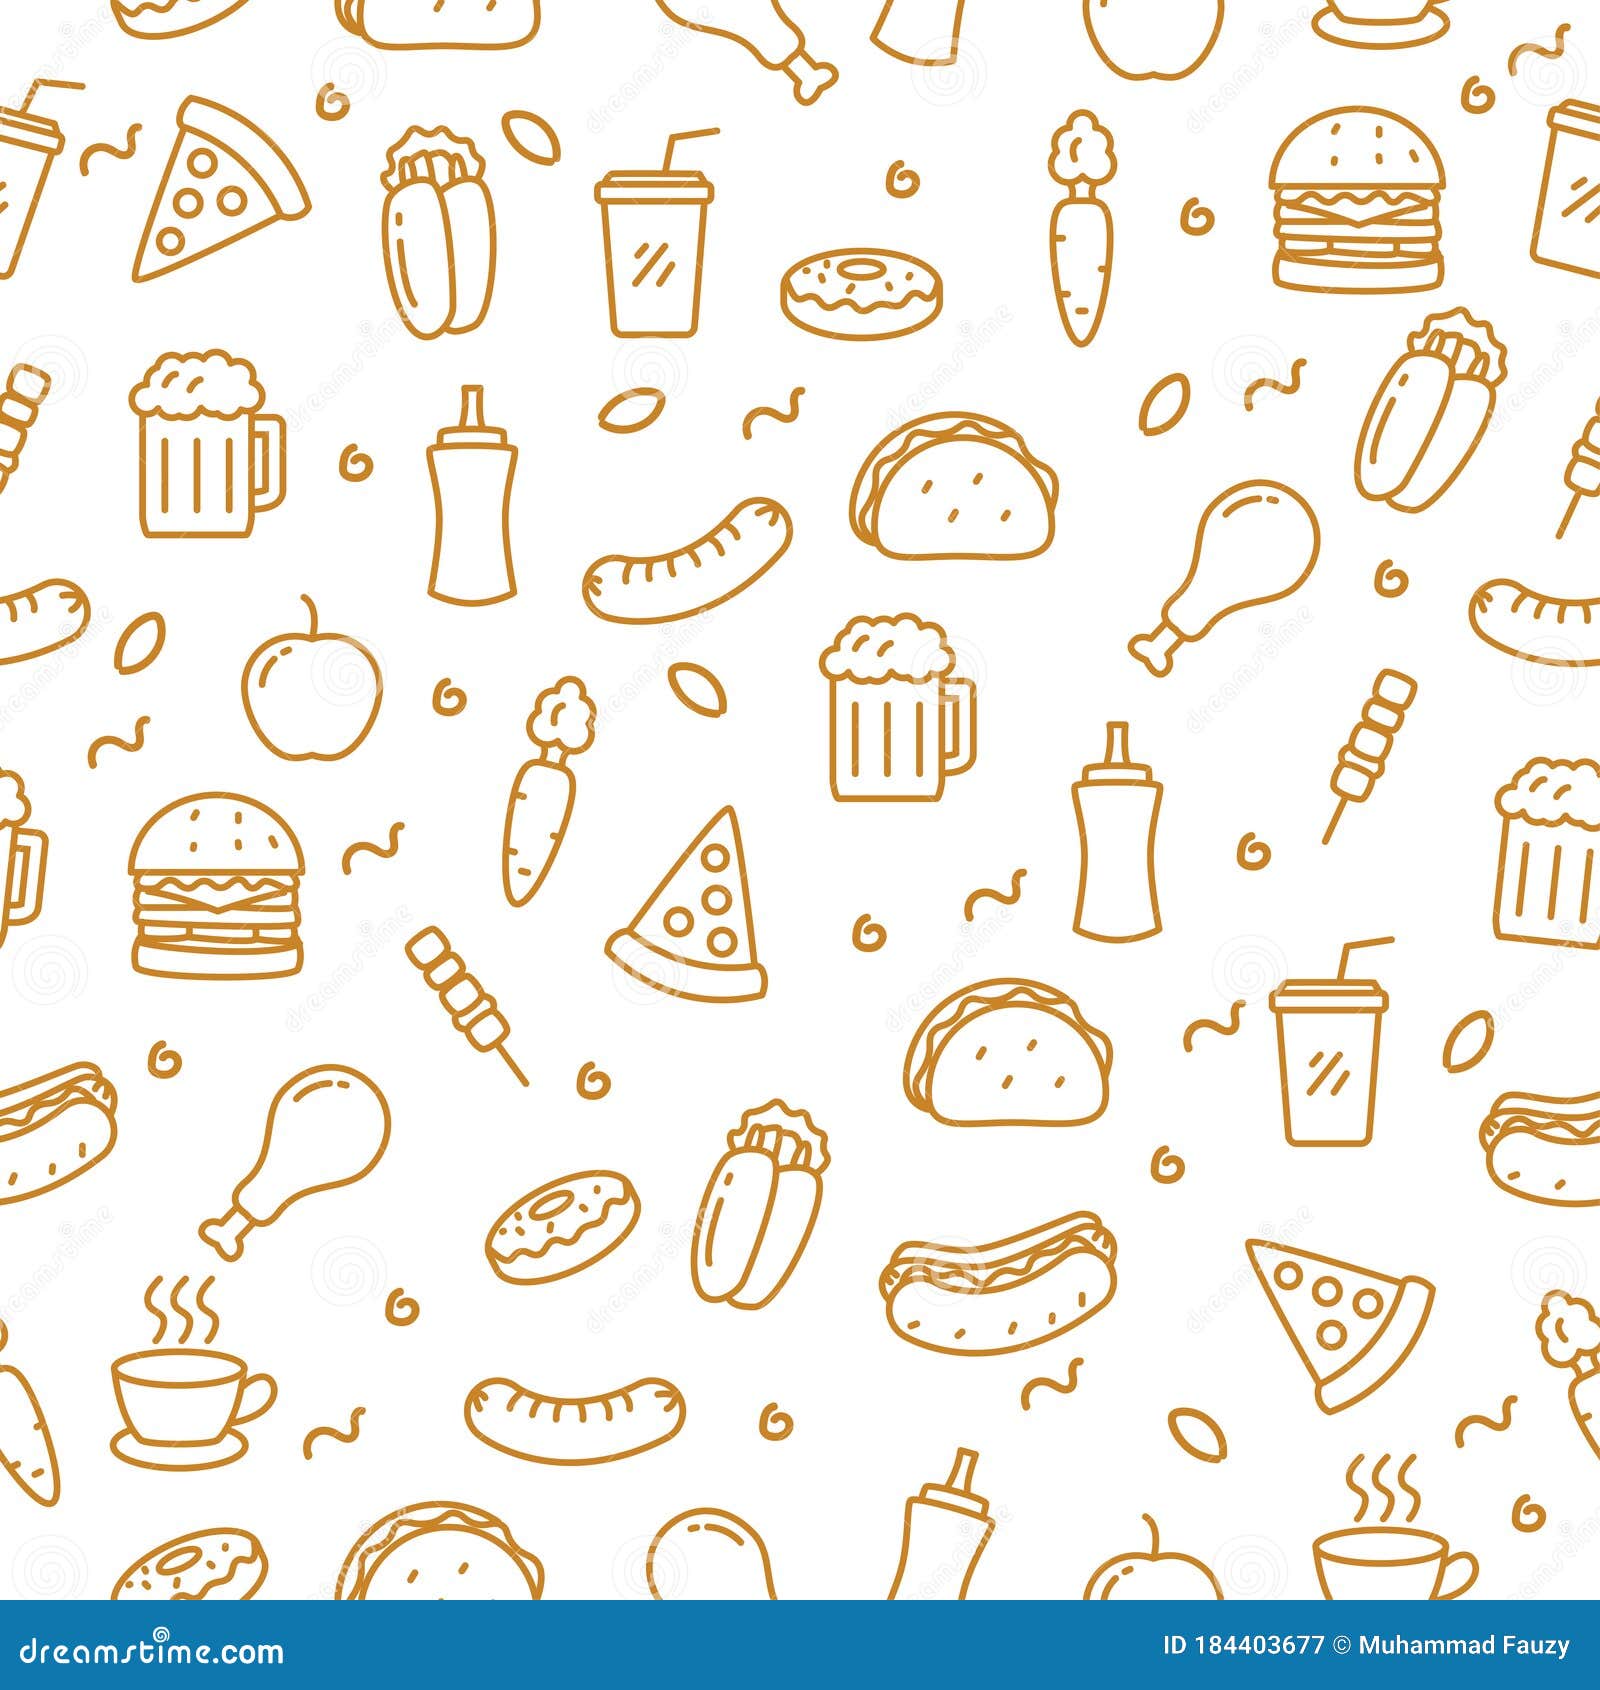 Food Doodle Seamless Pattern for Background Stock Vector - Illustration of  doodle, drawing: 184403677